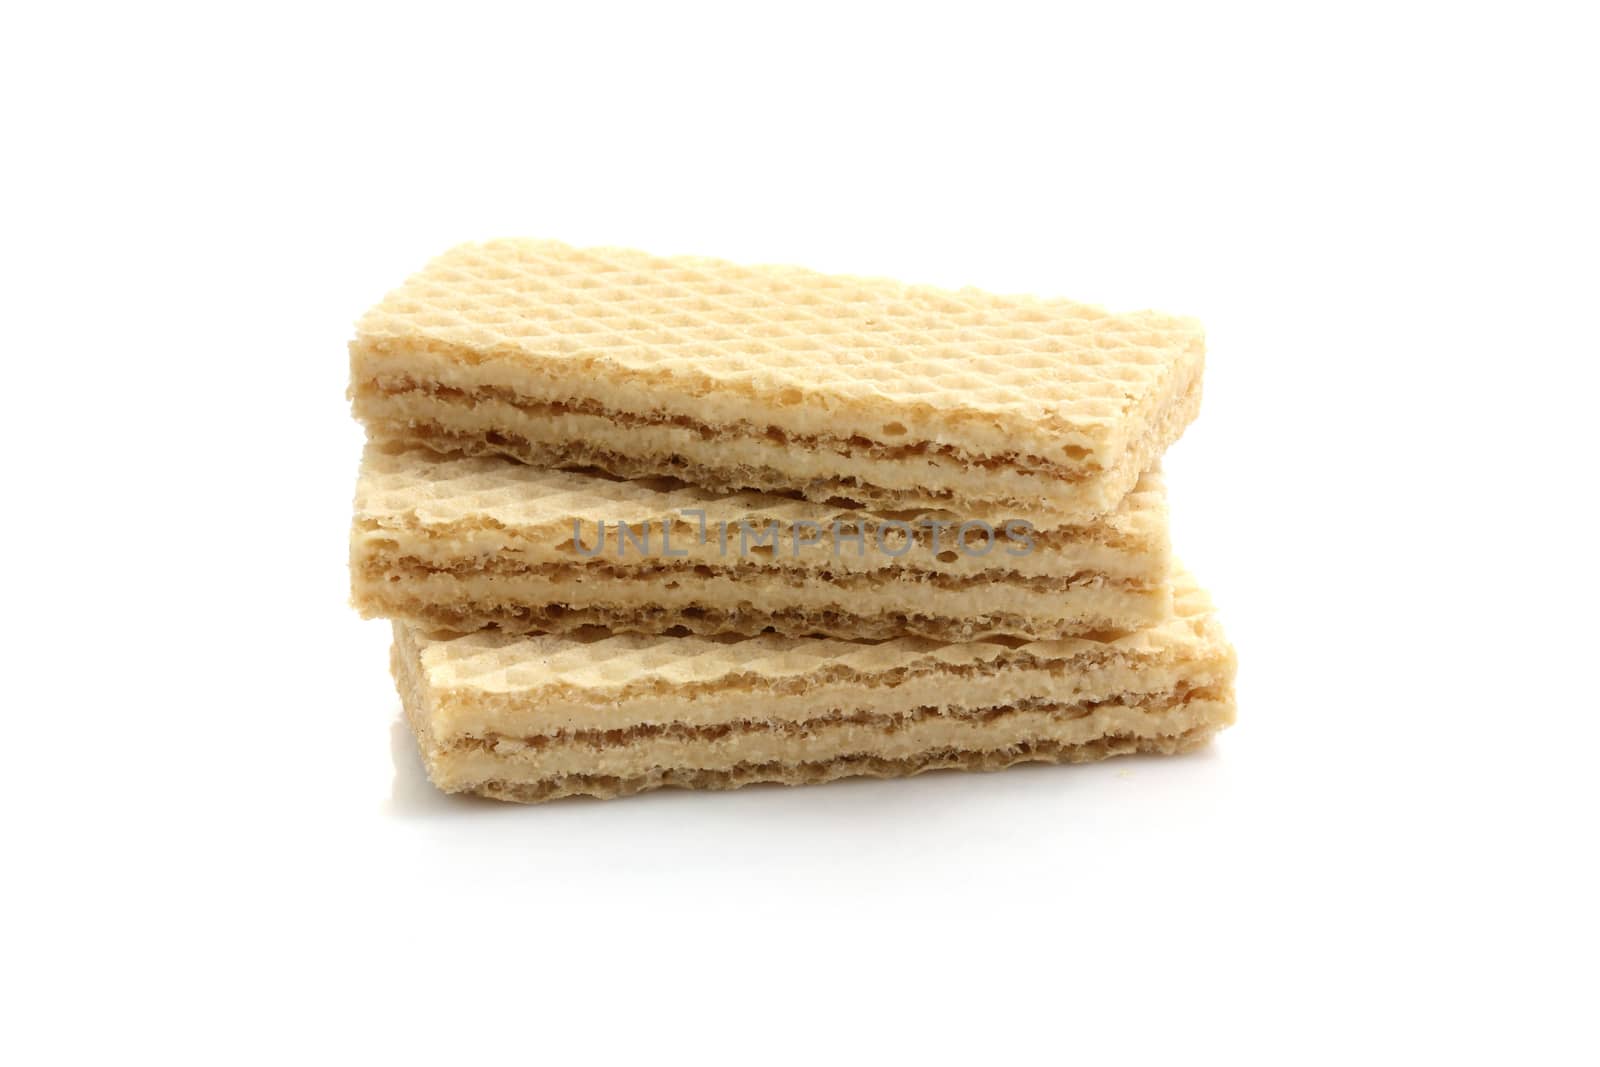 wafers isolated in white background by piyato